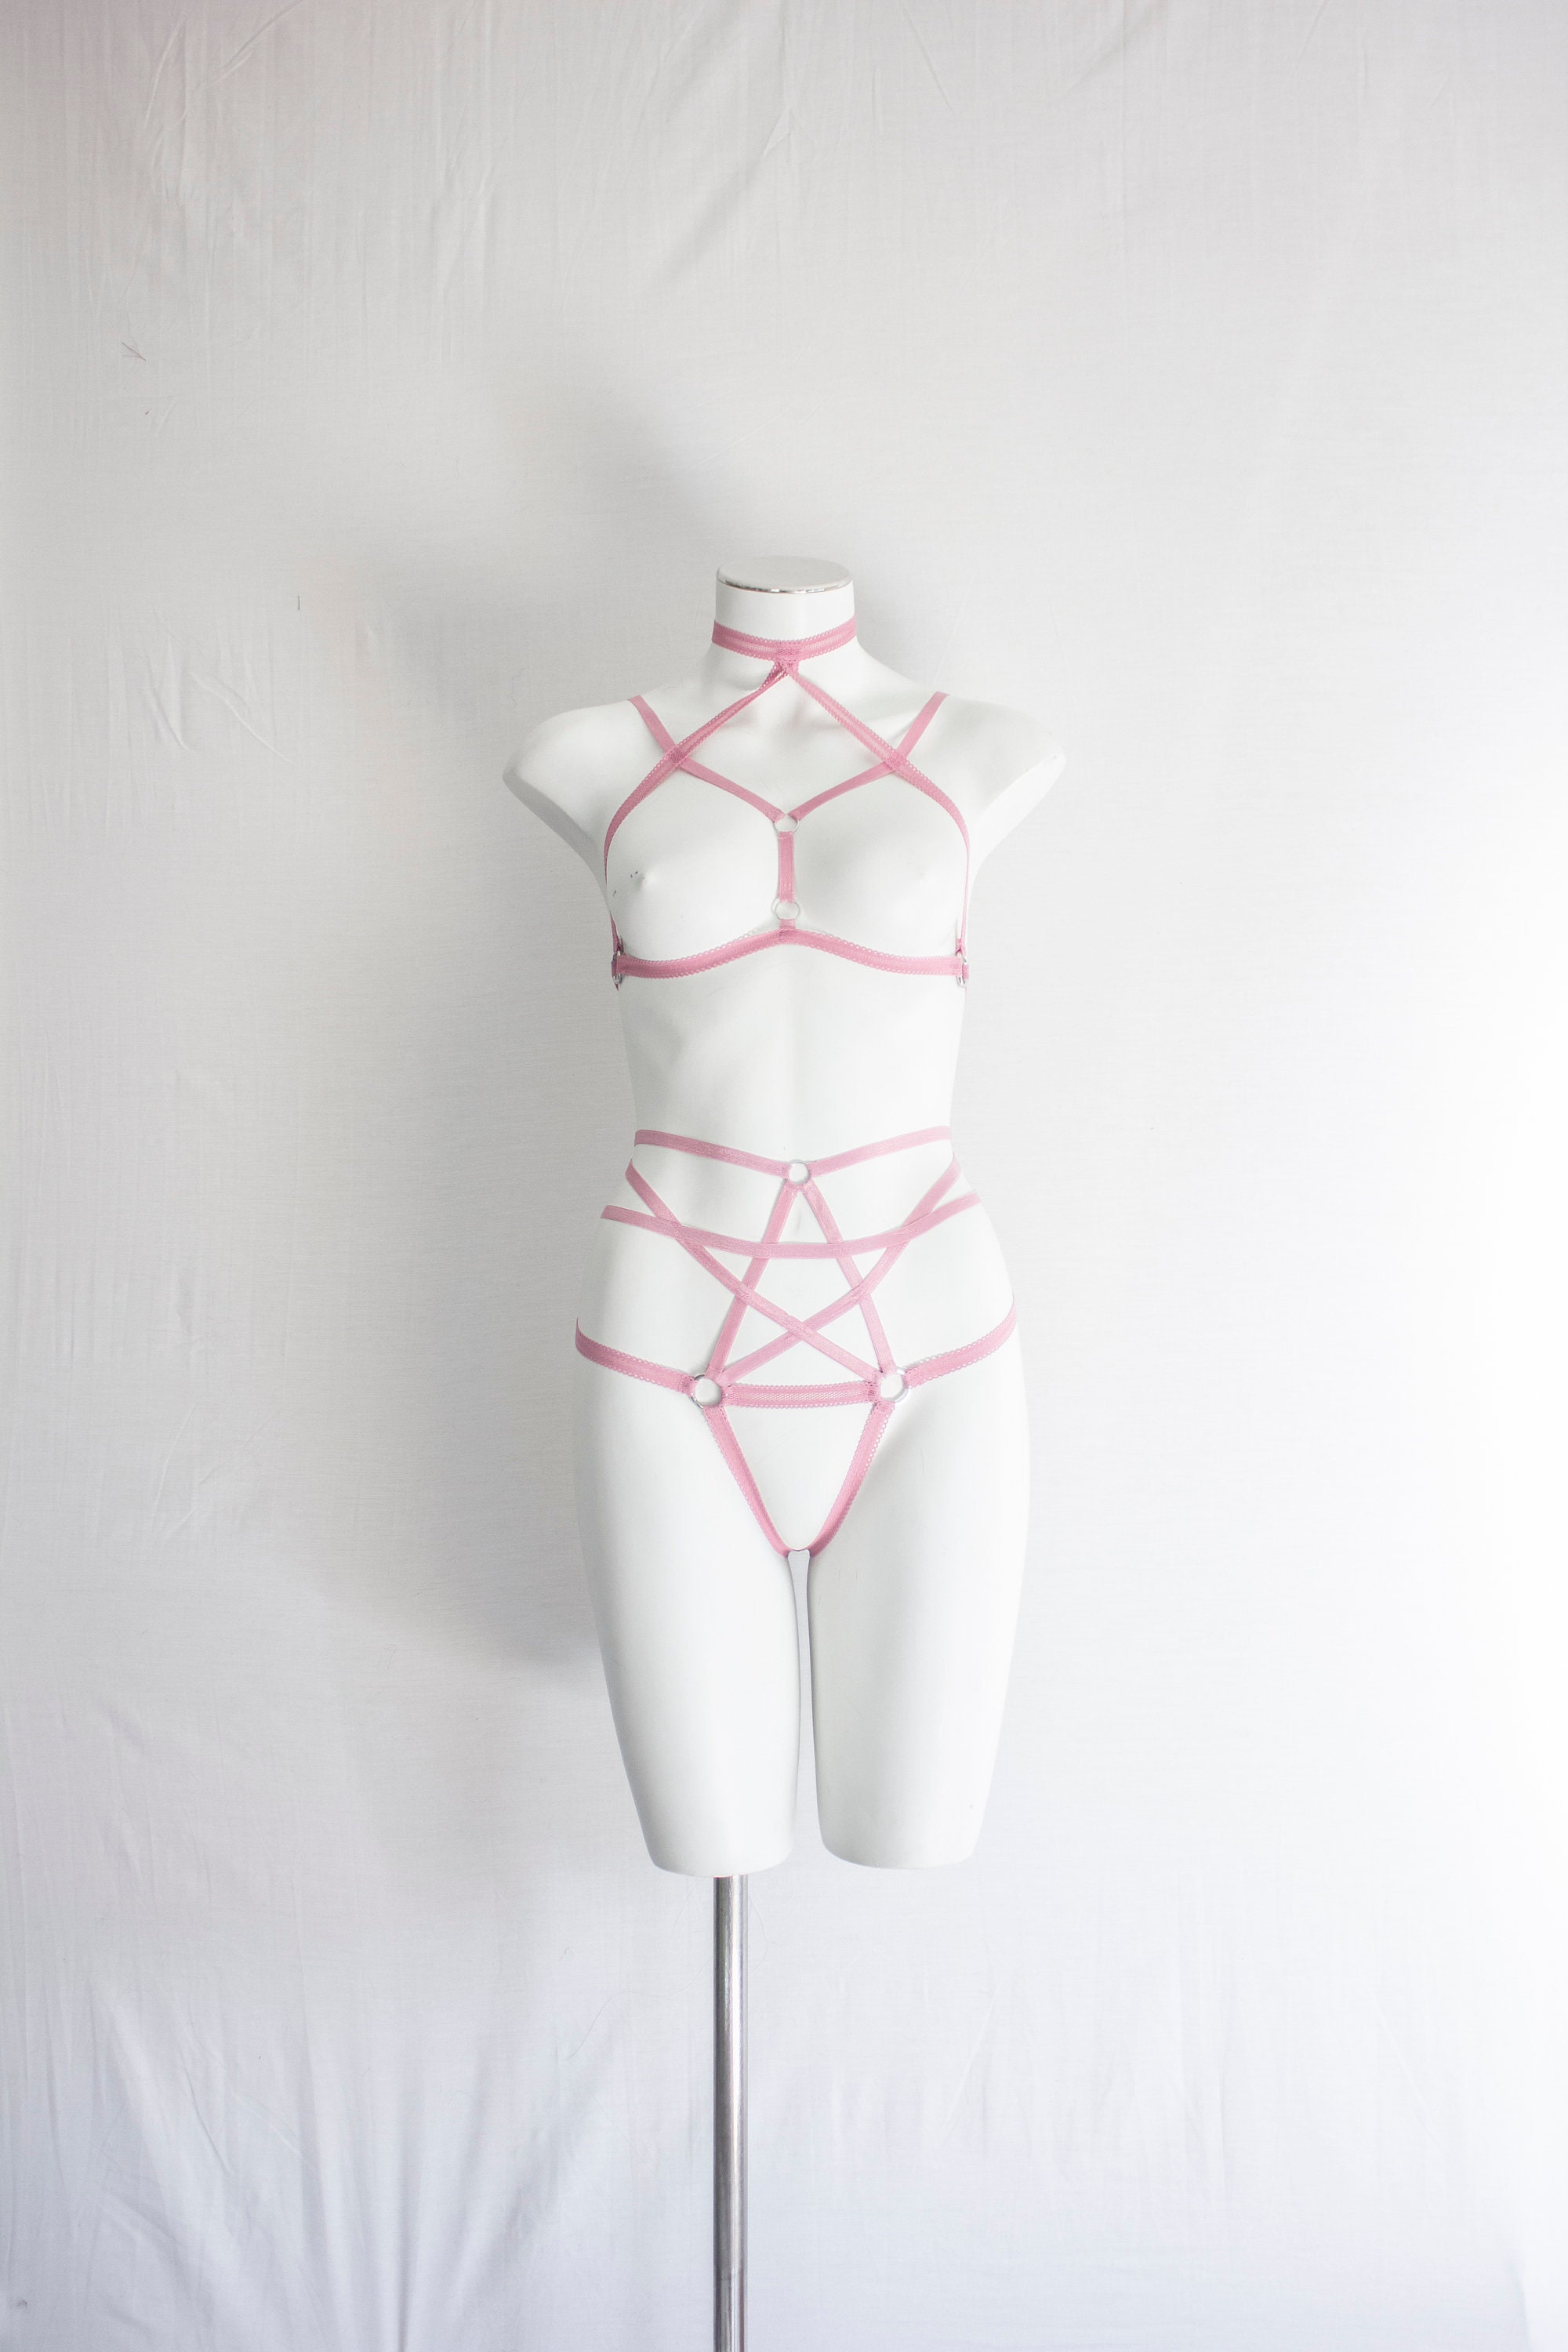 Pentagram Clothing: Dusty Rose Lingerie, Body Harness Woman, Pastel Goth,  Witch Clothing, Festival Fashion, Gothic, Exotic Dance Outfit